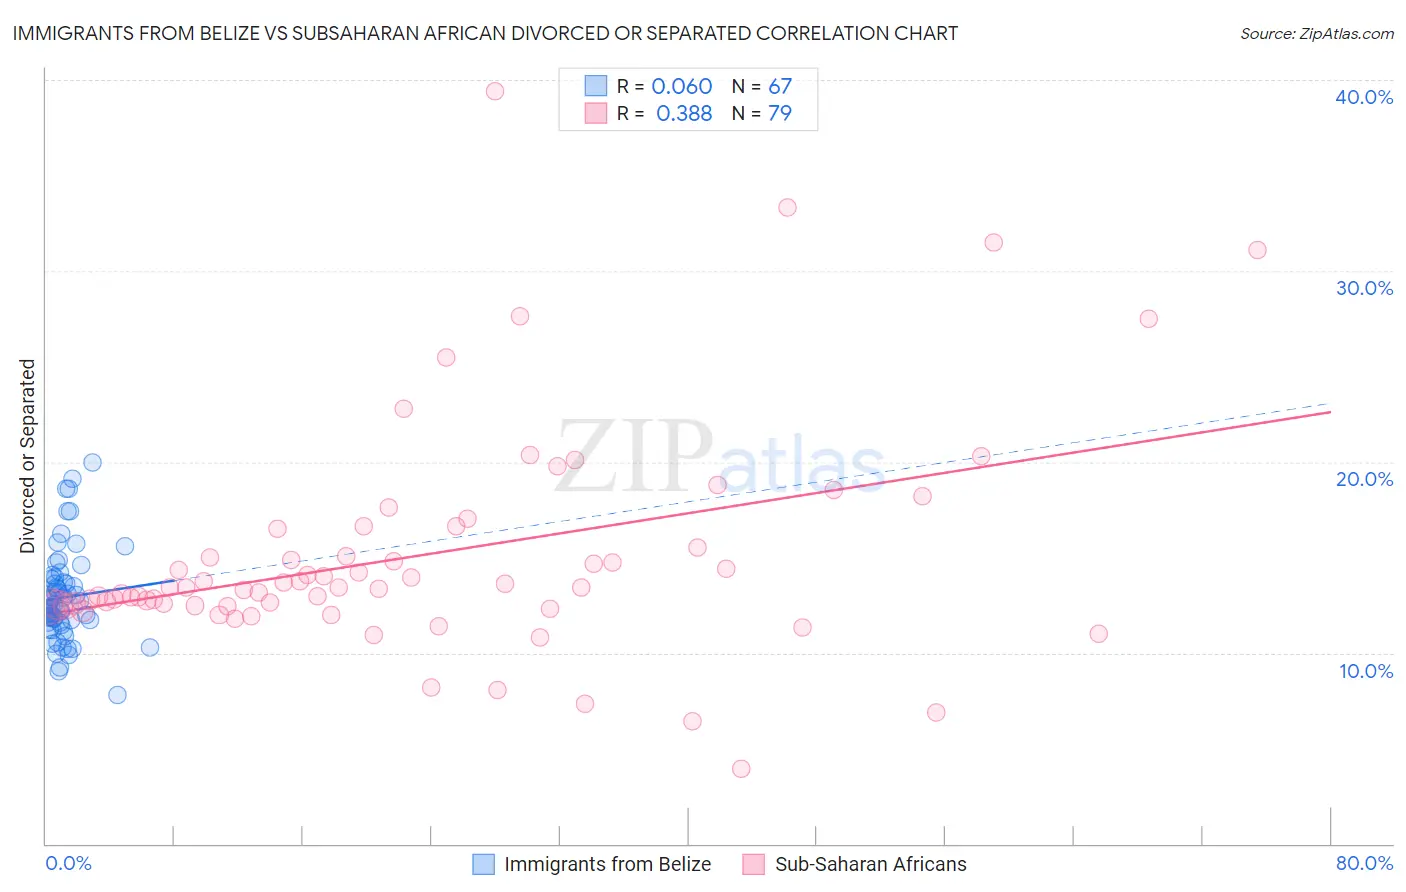 Immigrants from Belize vs Subsaharan African Divorced or Separated